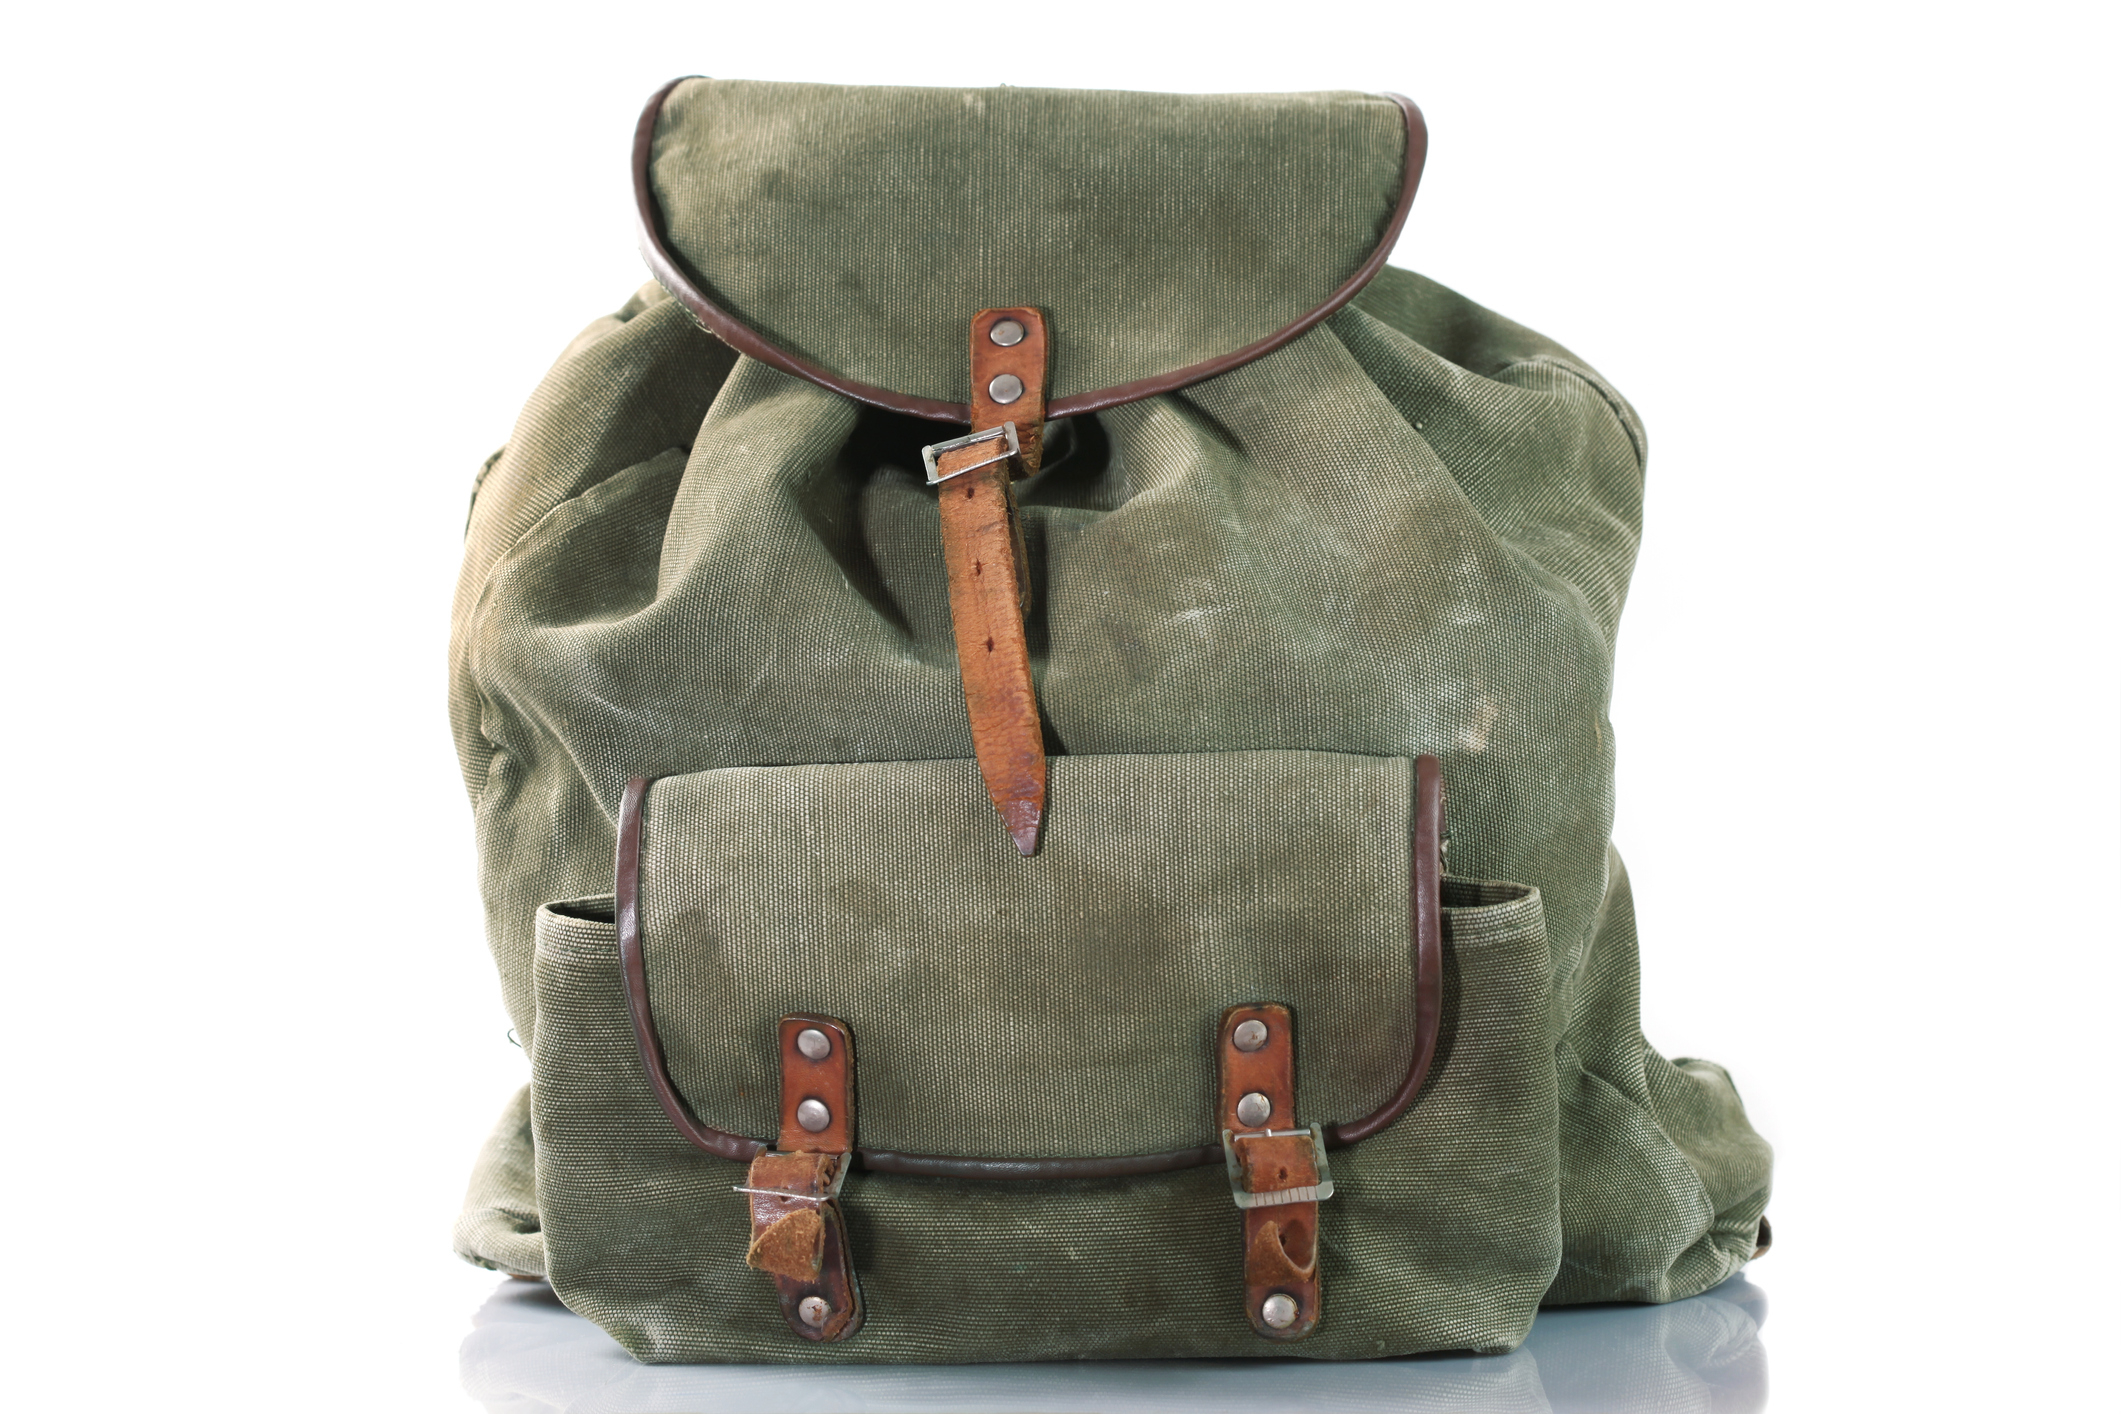 Vintage canvas backpack with leather straps, standing upright